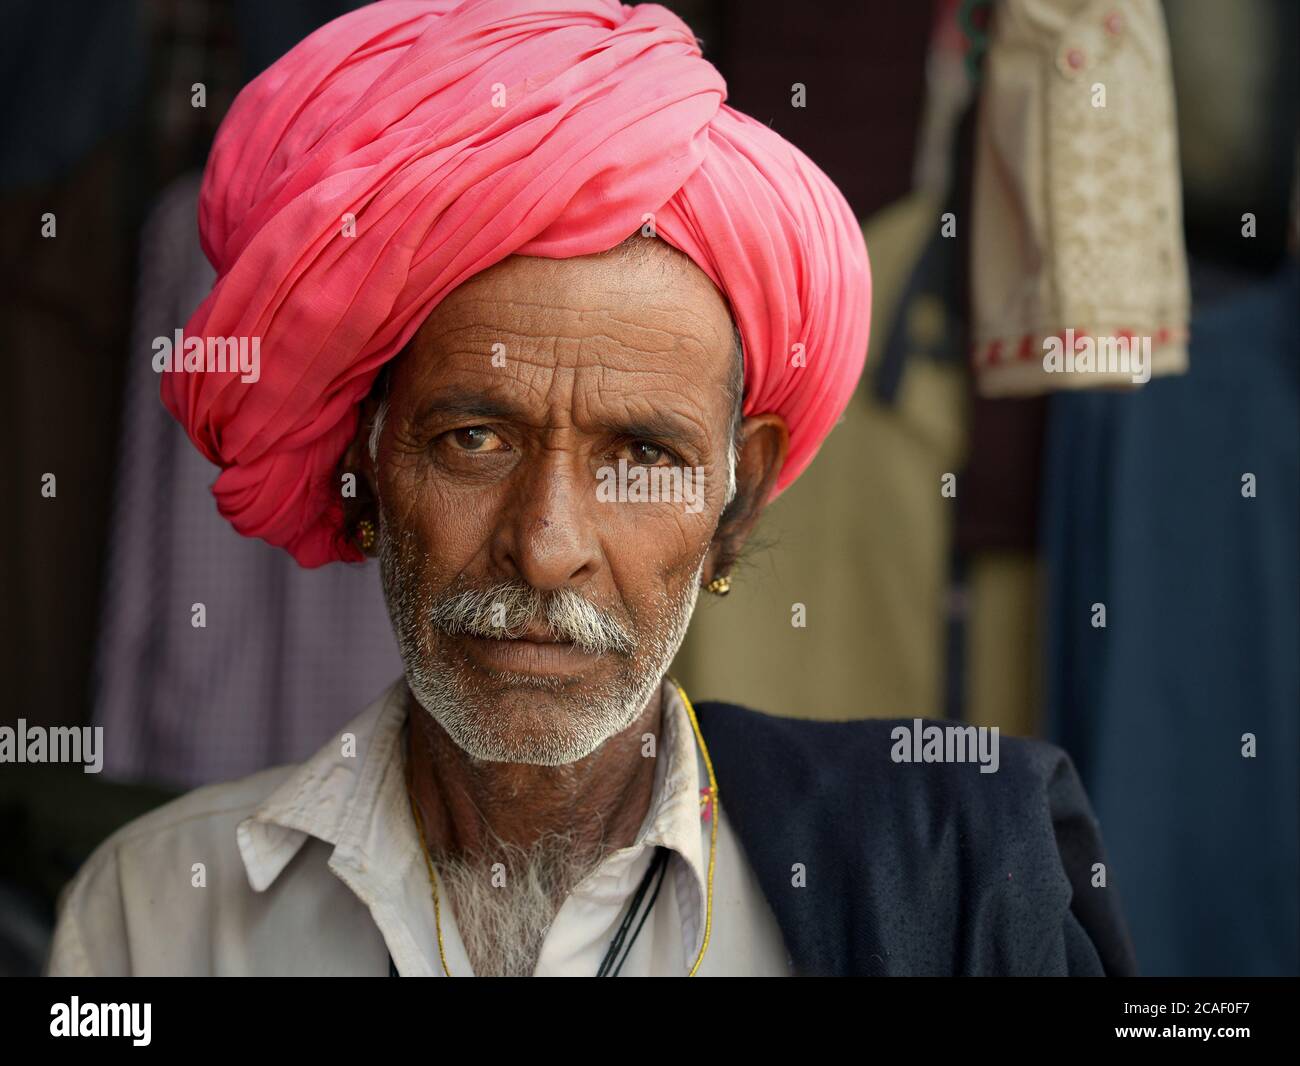 Elderly Indian Rajasthani man with pink turban poses for the camera. Stock Photo